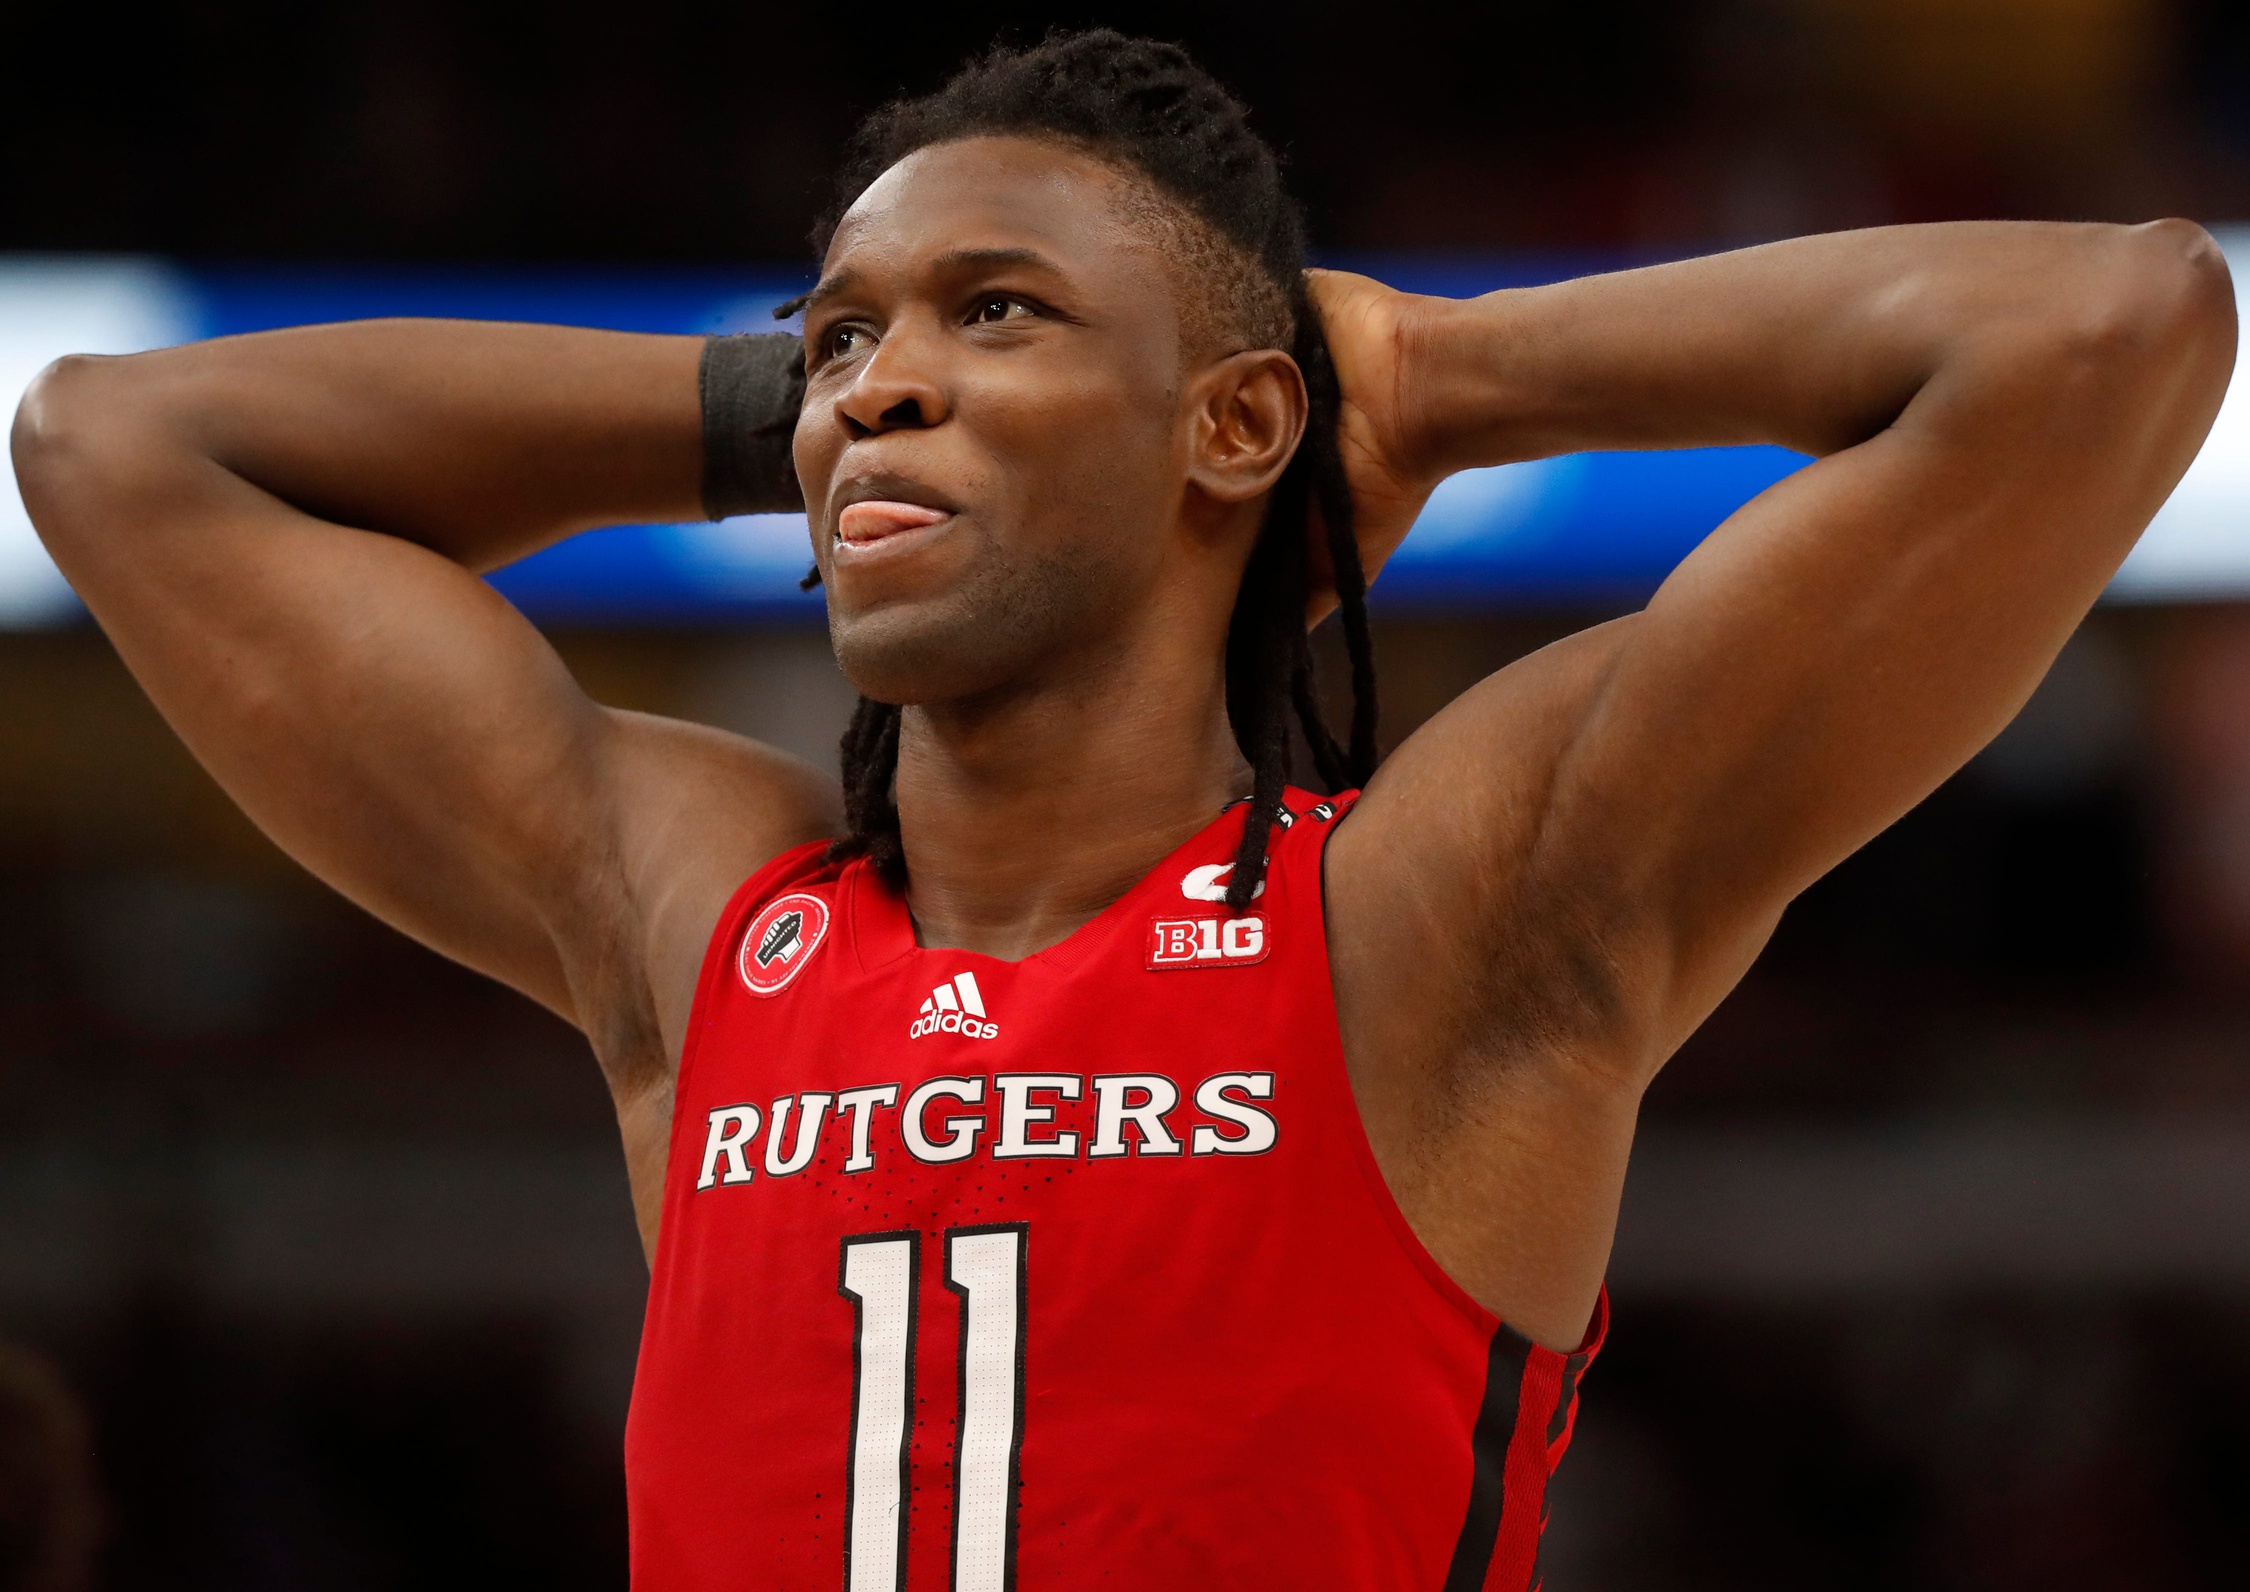 Rutgers Scarlet Knights center Clifford Omoruyi (11) reacts to a call during the Big Ten Men’s Basketball Tournament game against the Purdue Boilermakers, Friday, March 10, 2023, at United Center in Chicago. Purdue Boilermakers won 70-65. Purrut031023 Am15080